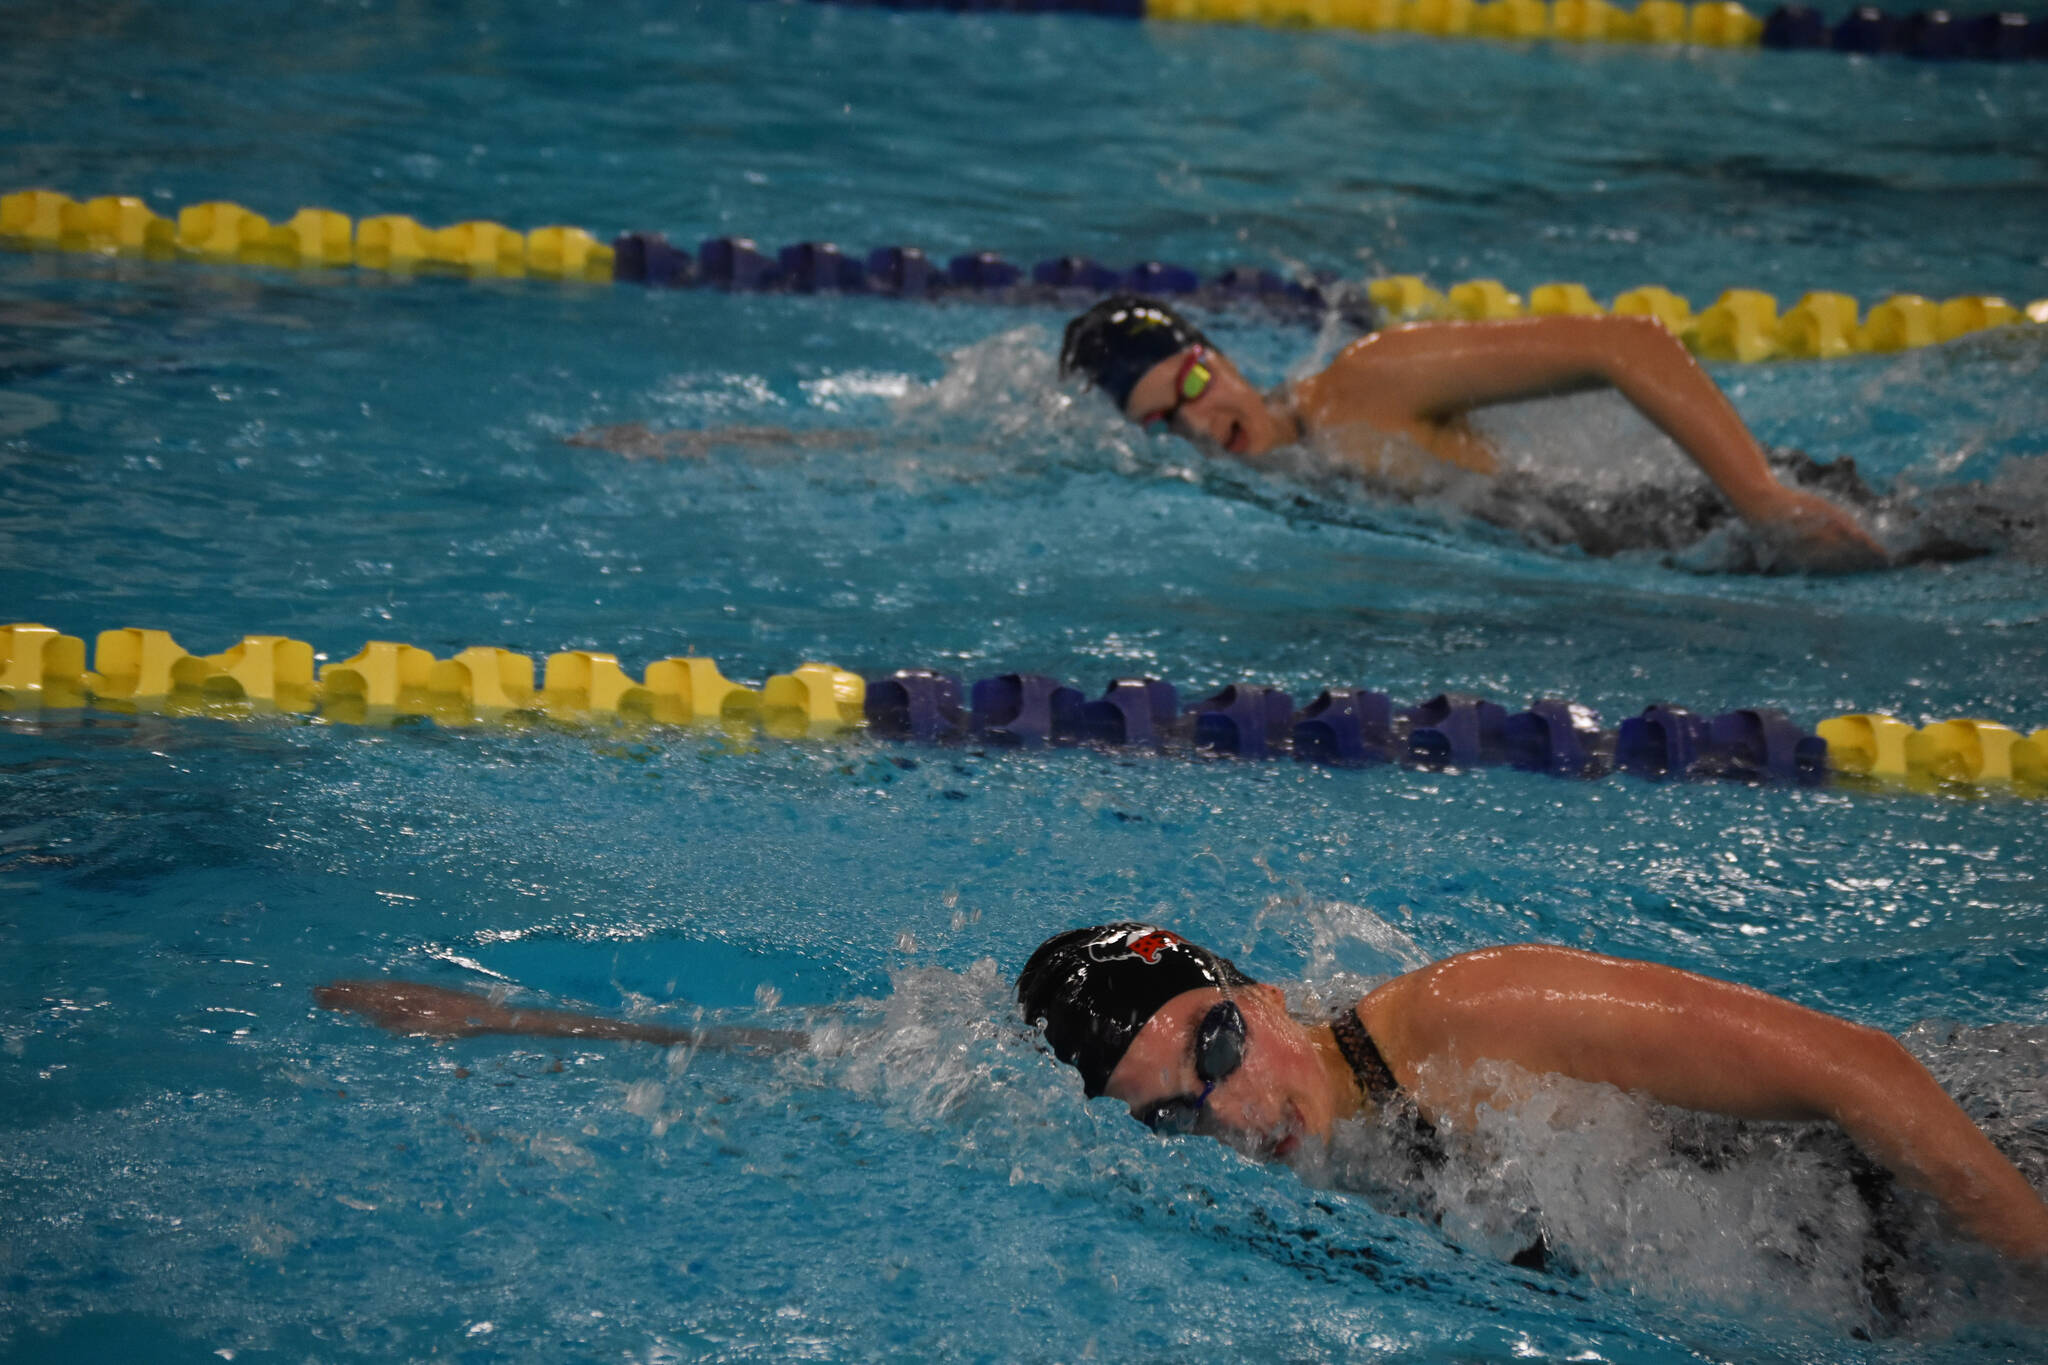 Samantha Schwarting (closest), of Juneau-Douglas, and Carly Nelson, of Homer, swim neck-and-neck in the 500-yard freestyle during finals at the ASAA State Swim & Dive Championships on Saturday, Nov. 5, 2022, at Bartlett High School in Anchorage, Alaska. (Jake Dye/Peninsula Clarion)